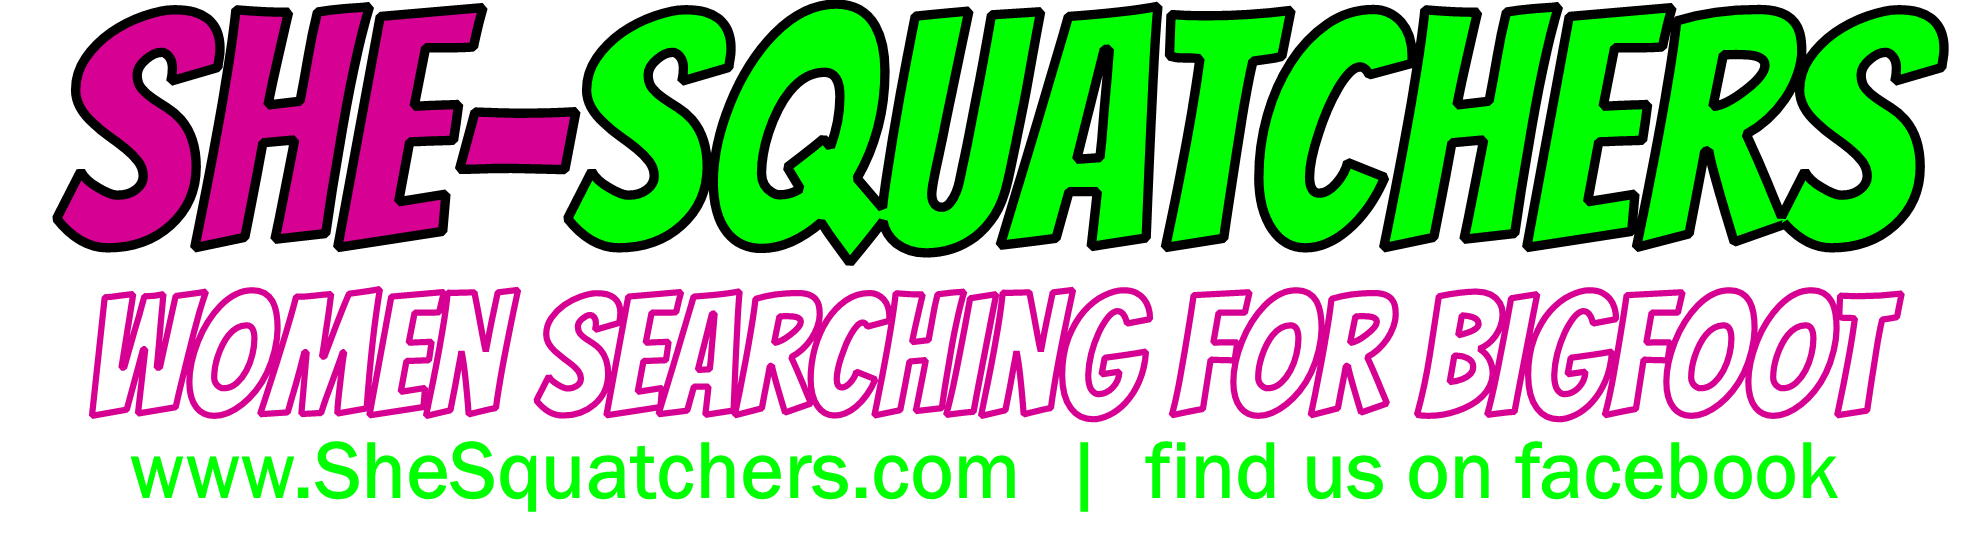 BIGFOOT: She-Squatchers announces new team member - Tammy Treichel, as fifth member to the Midwest's first all-female Bigfoot team - SheSquatchers.com  